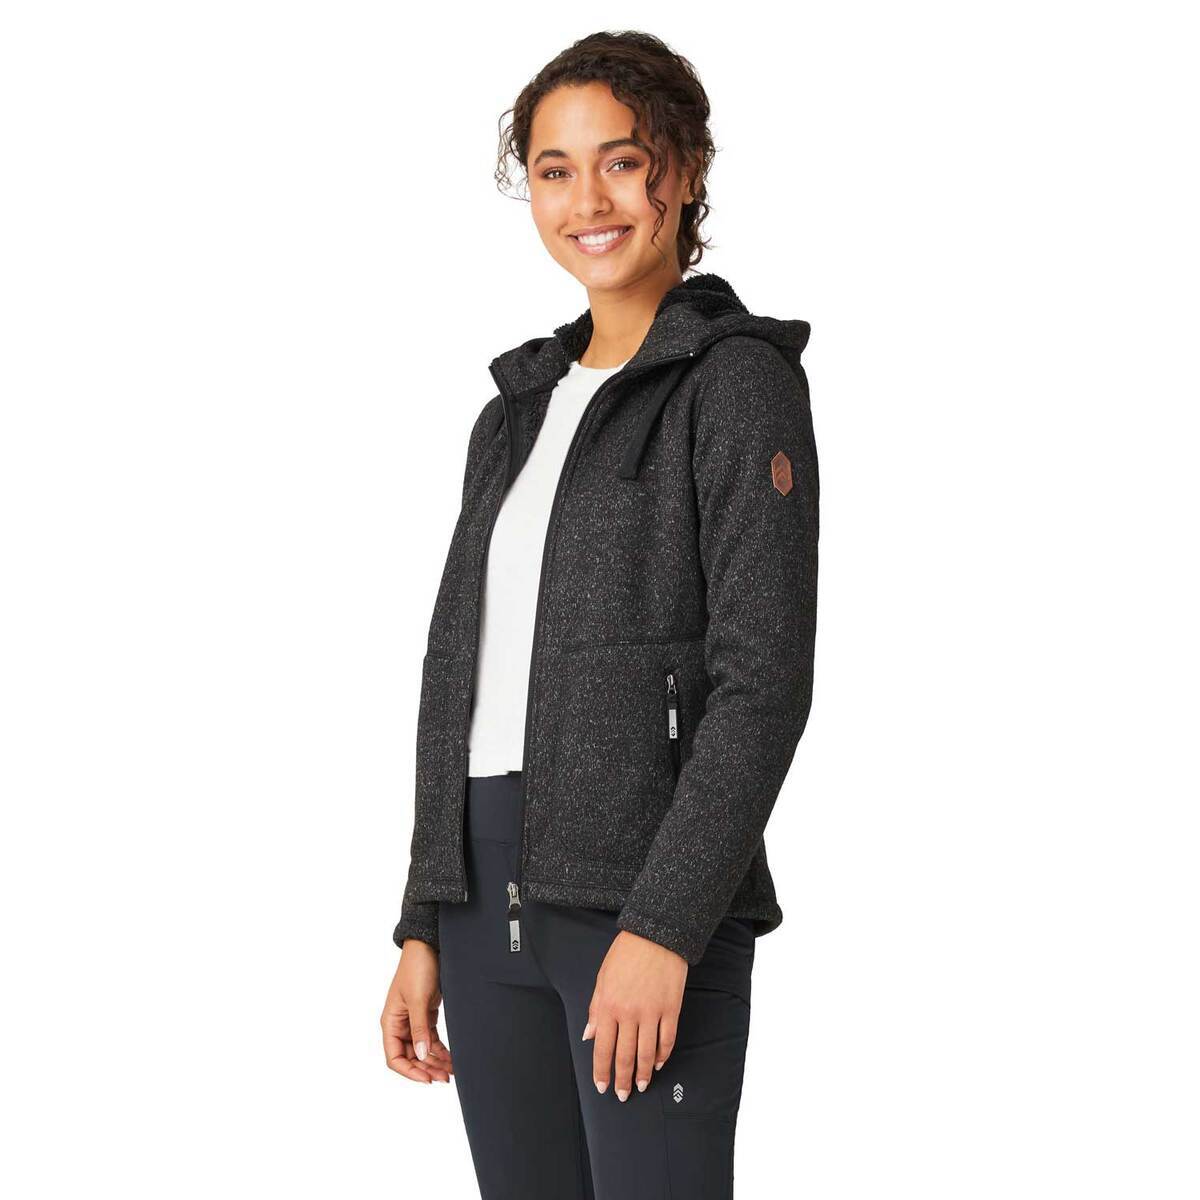 Outerwear Clothing Clearance - Men's & Women's